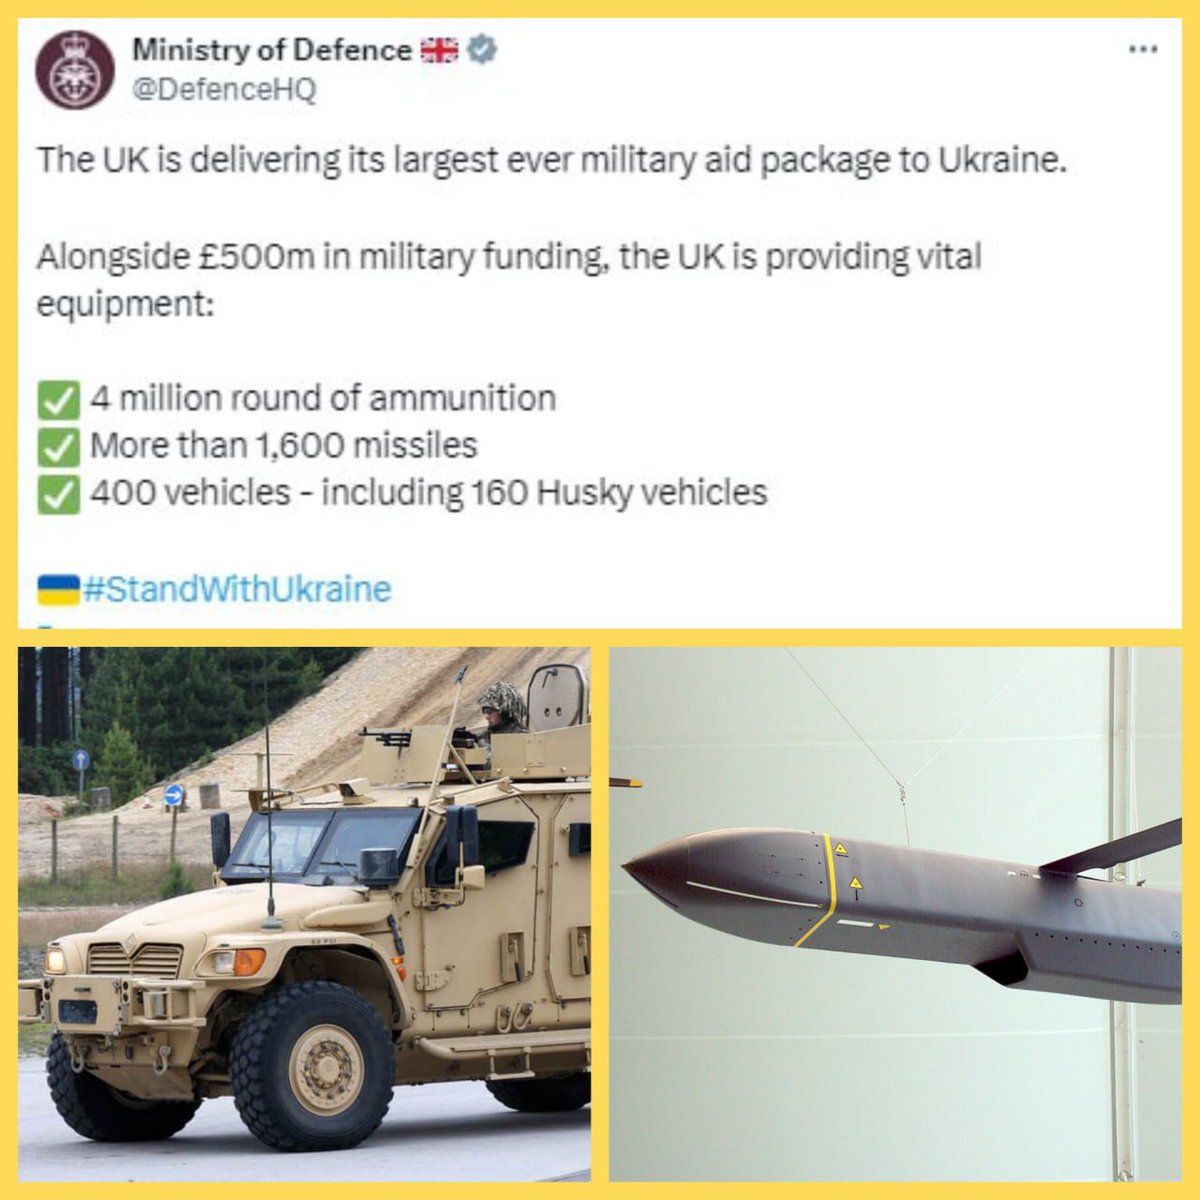 ⚡️The largest package of military aid in history is handed over to 🇺🇦Ukraine by 🇬🇧Great Britain, - the Ministry of Defense. A £500m military package which will include: ▪️4 million cartridges; ▪️Over 1,600 (!) missiles; ▪️400 vehicles, including Husky armored vehicles.